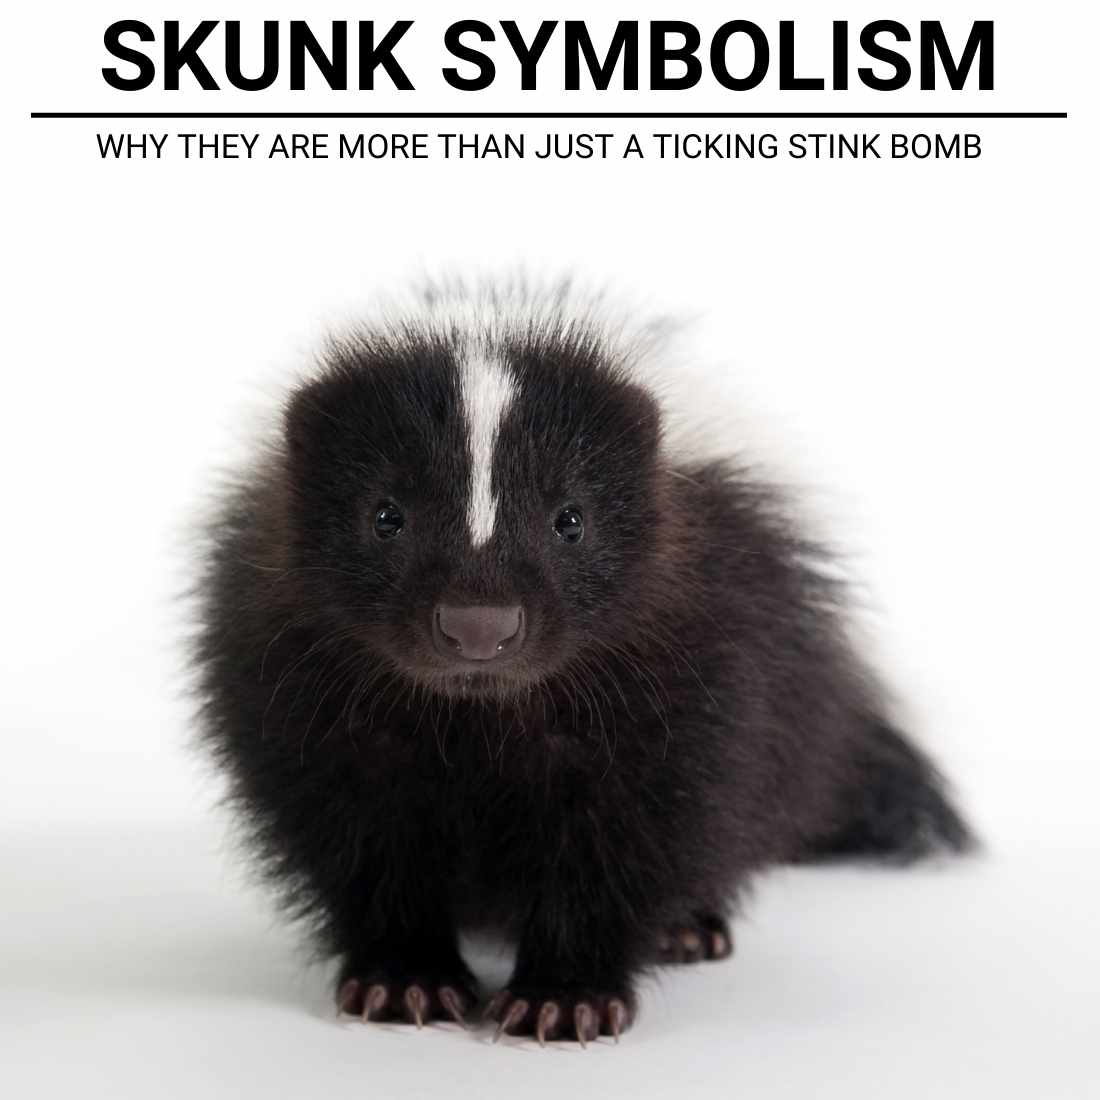 Skunk Symbolism: What Does A Skunk Mean Spiritually?